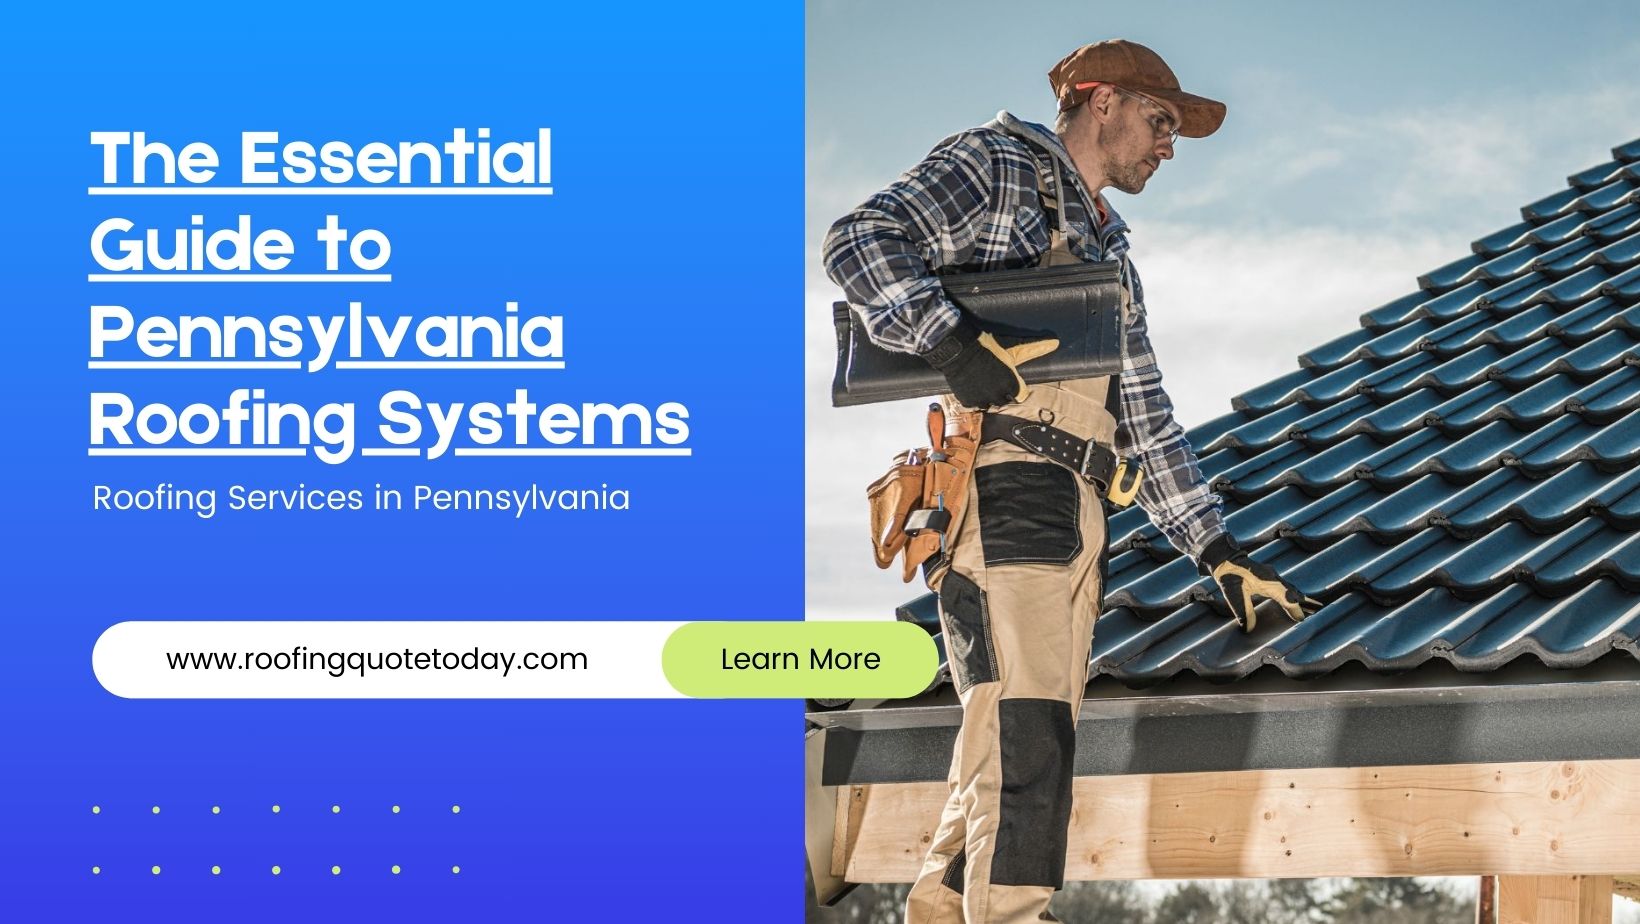 The Essential Guide to Pennsylvania Roofing Systems